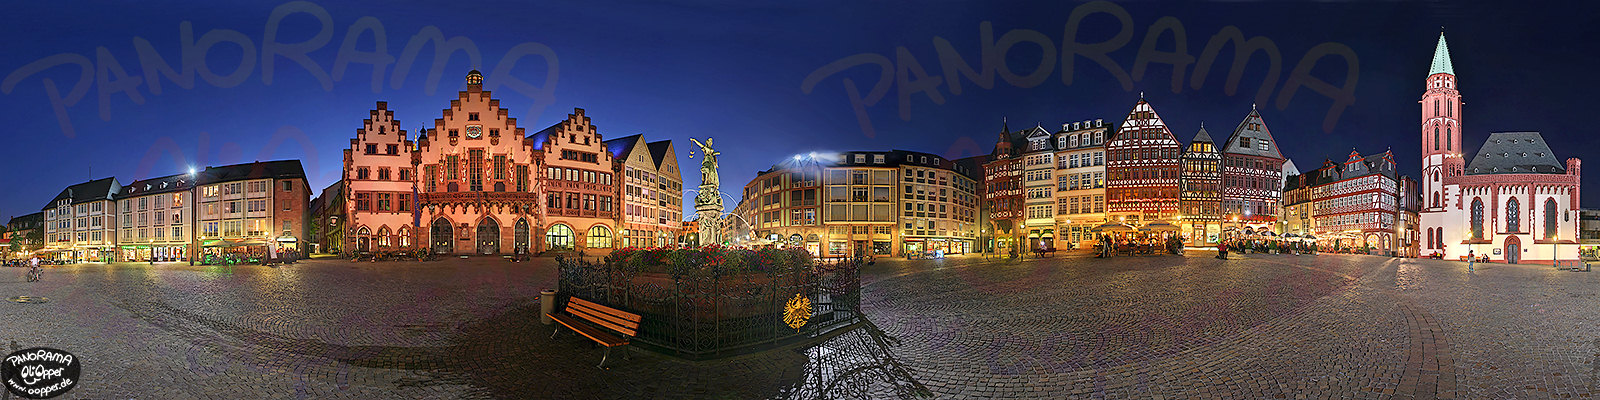 Panorama Frankfurt - Rmer - p075 - (c) by Oliver Opper